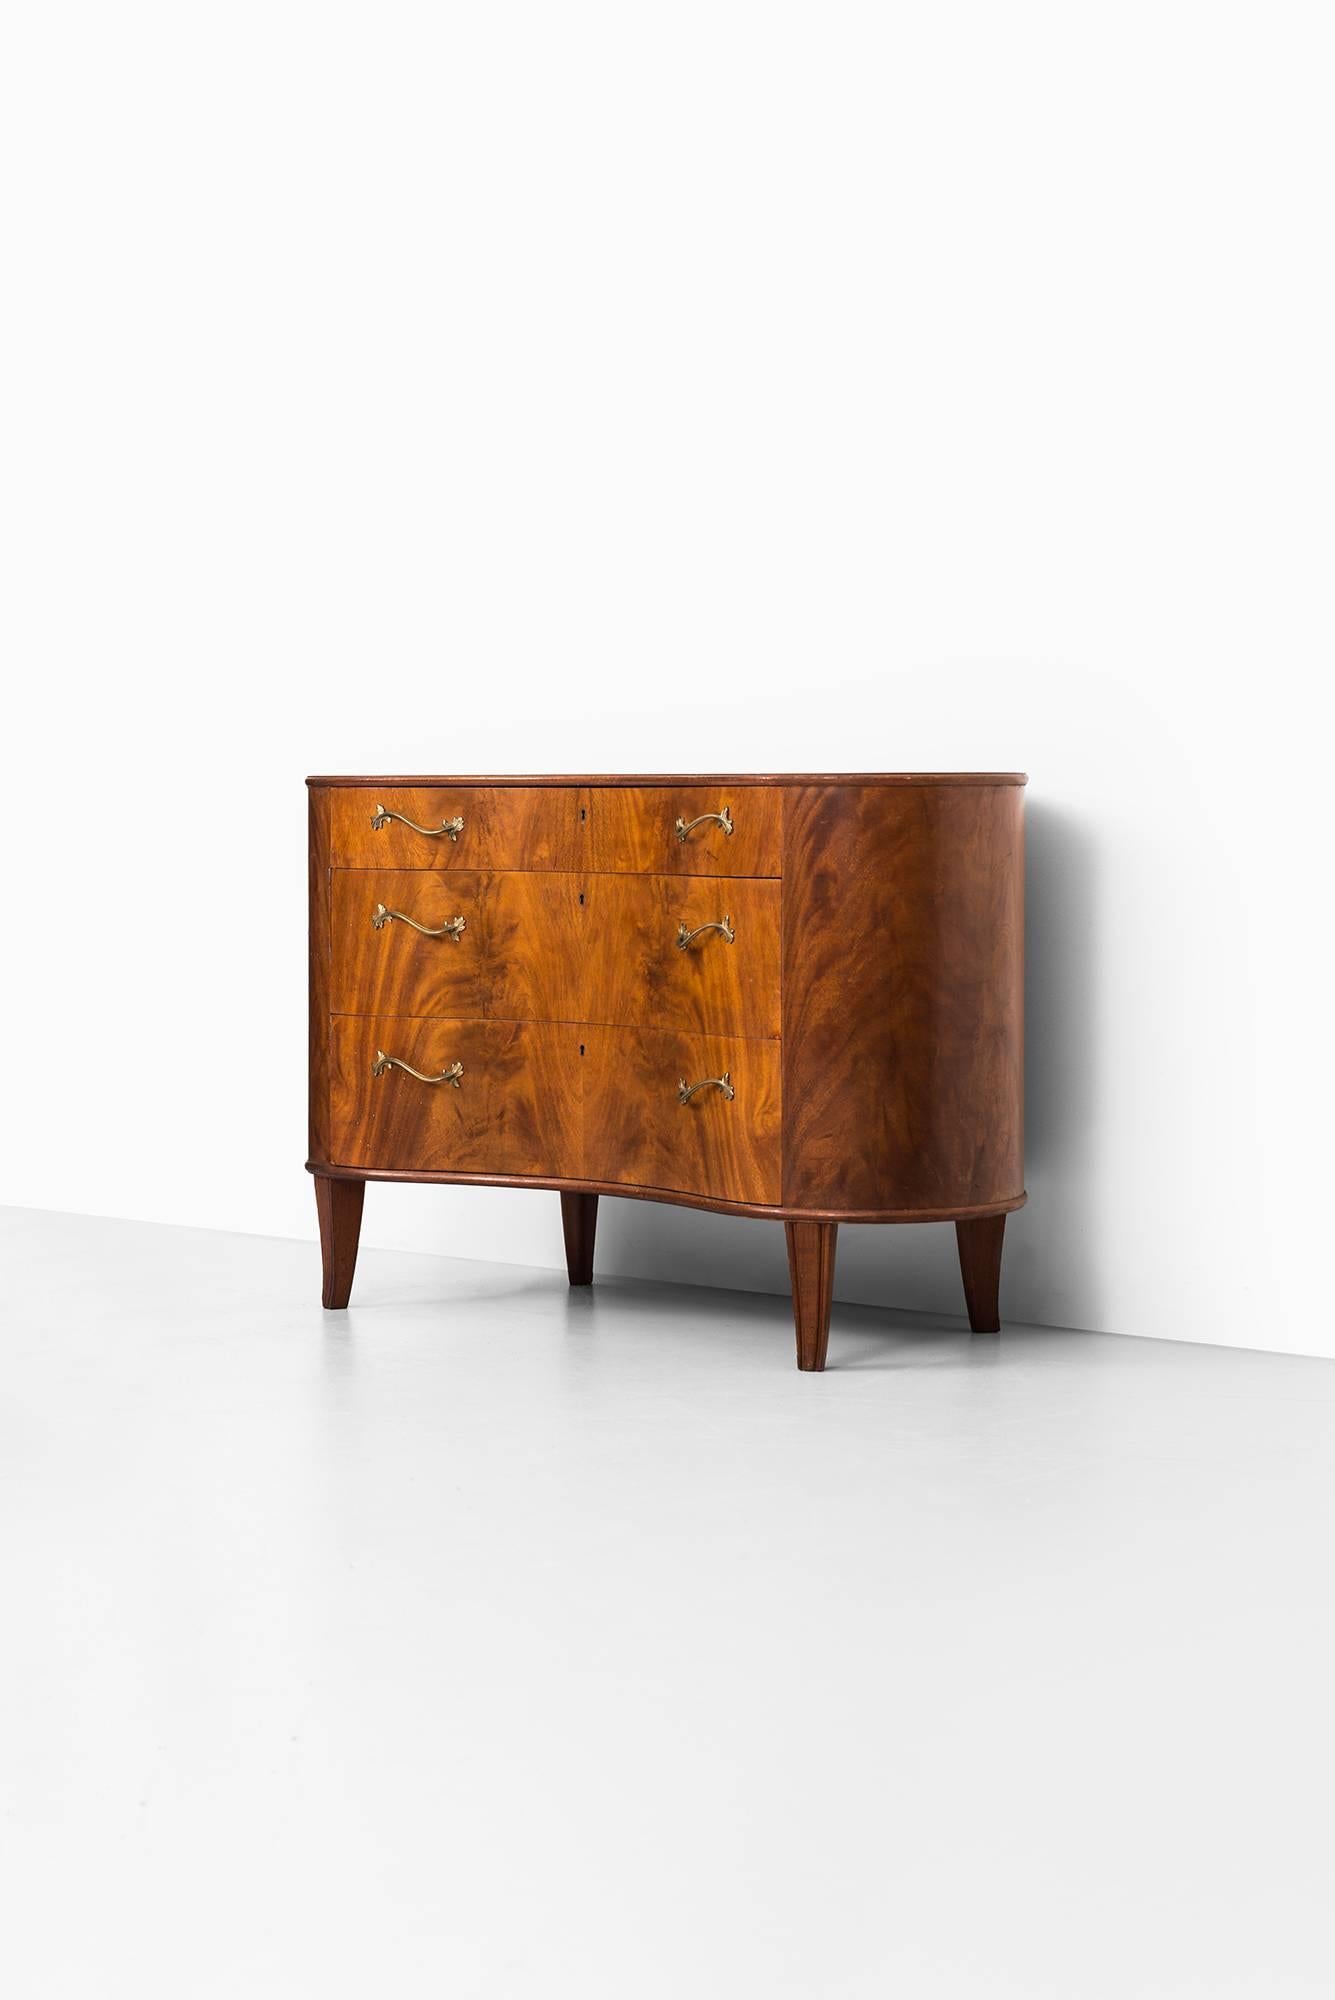 Very rare freestanding kidney shaped bureau attributed to Axel Larsson. Produced by Bodafors in Sweden.